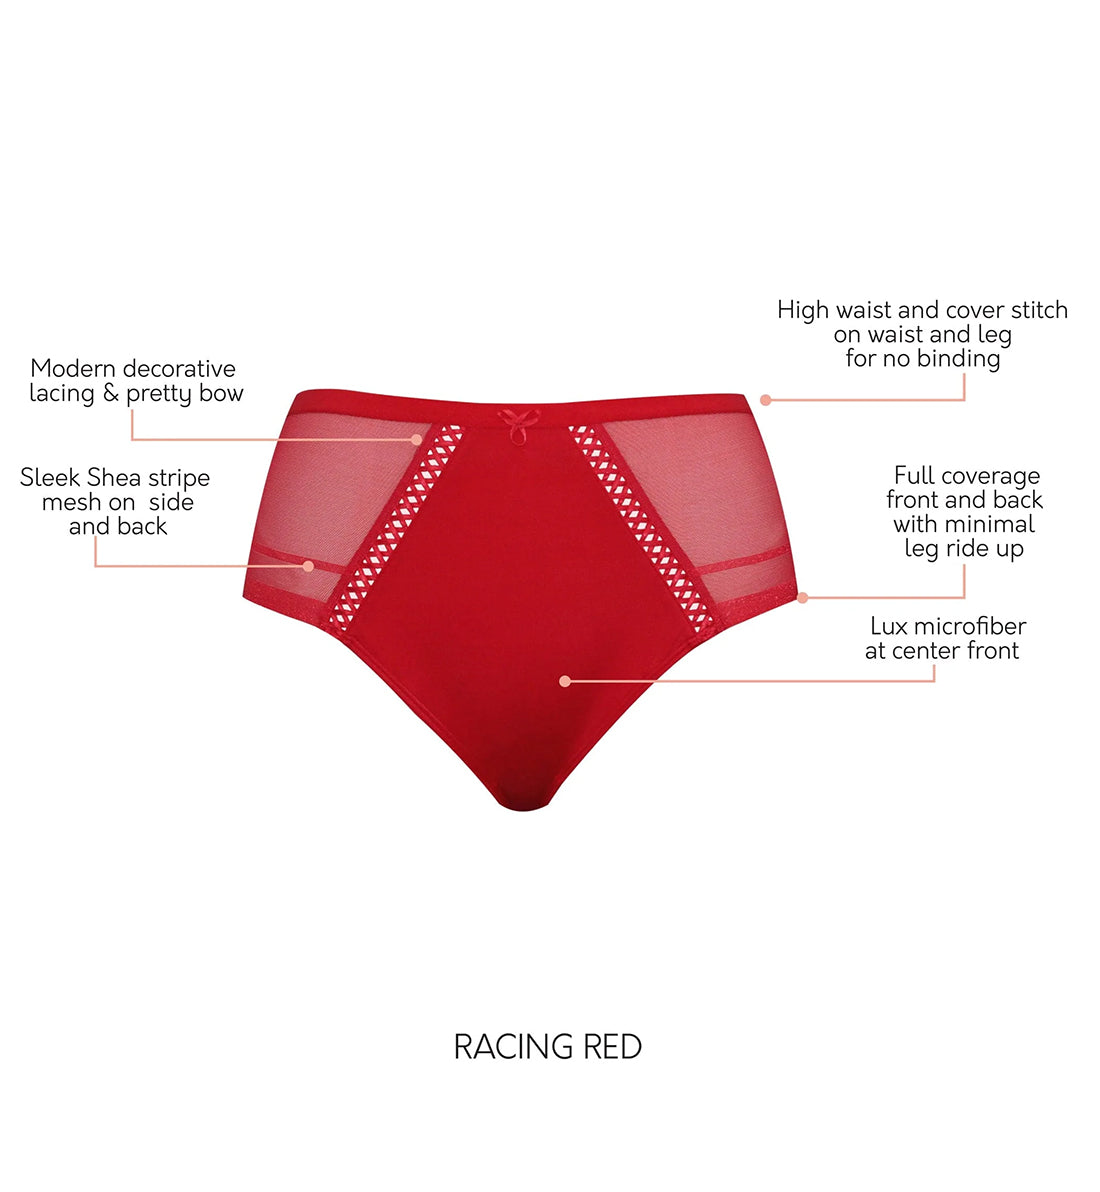 Parfait Shea Full Brief Panty (P60632),Small,Racing Red - Racing Red,Small